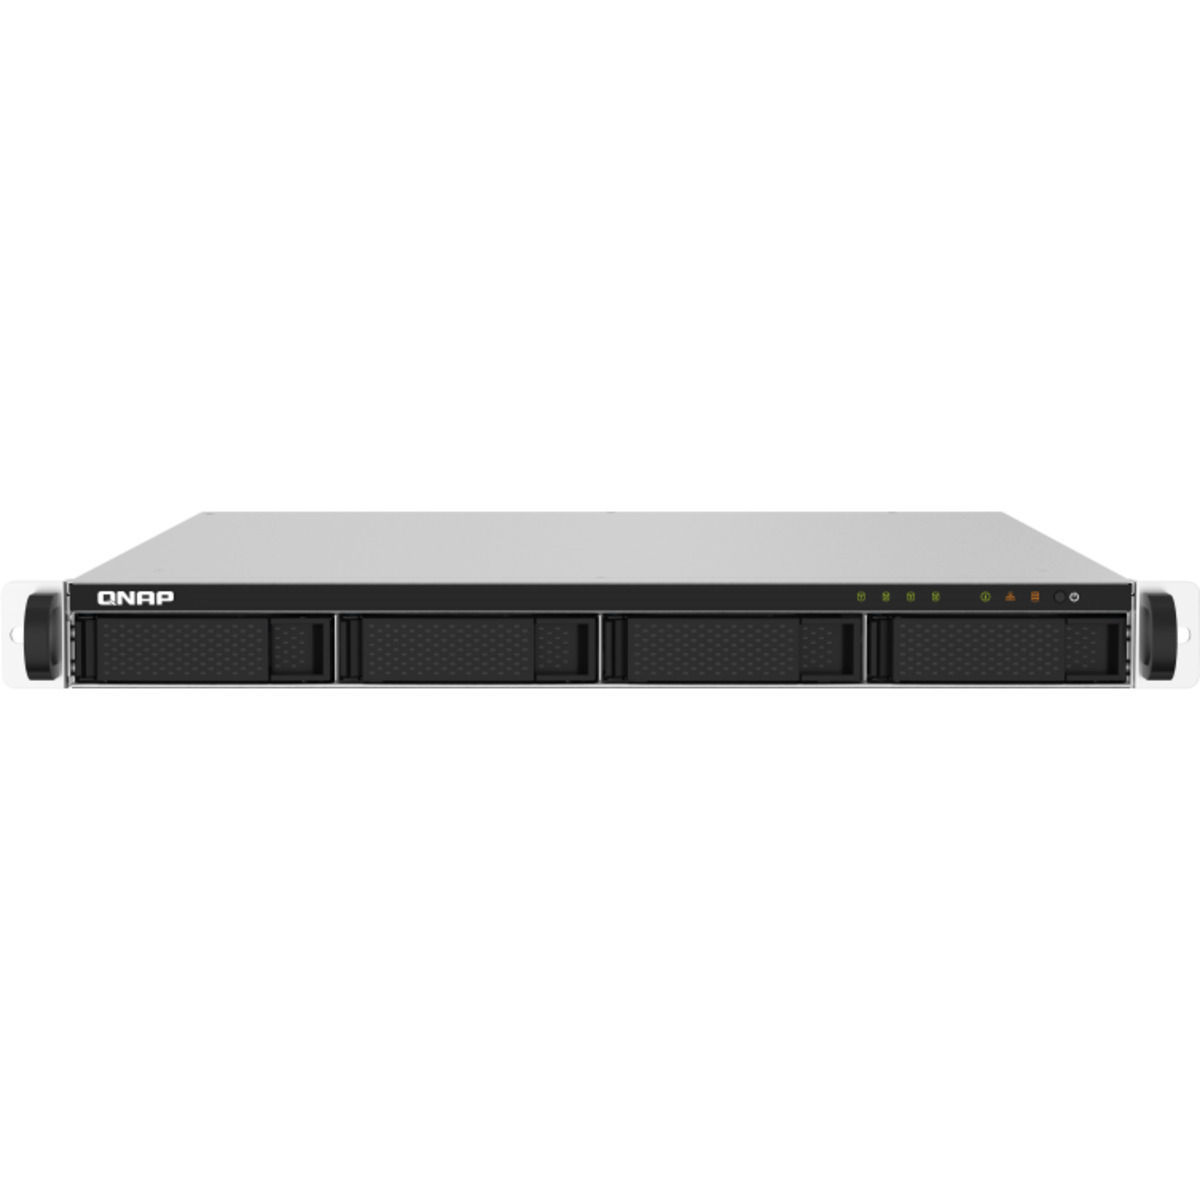 QNAP TS-432PXU-RP 32tb 4-Bay RackMount Personal / Basic Home / Small Office NAS - Network Attached Storage Device 4x8tb Western Digital Red Plus WD80EFPX 3.5 7200rpm SATA 6Gb/s HDD NAS Class Drives Installed - Burn-In Tested - FREE RAM UPGRADE TS-432PXU-RP